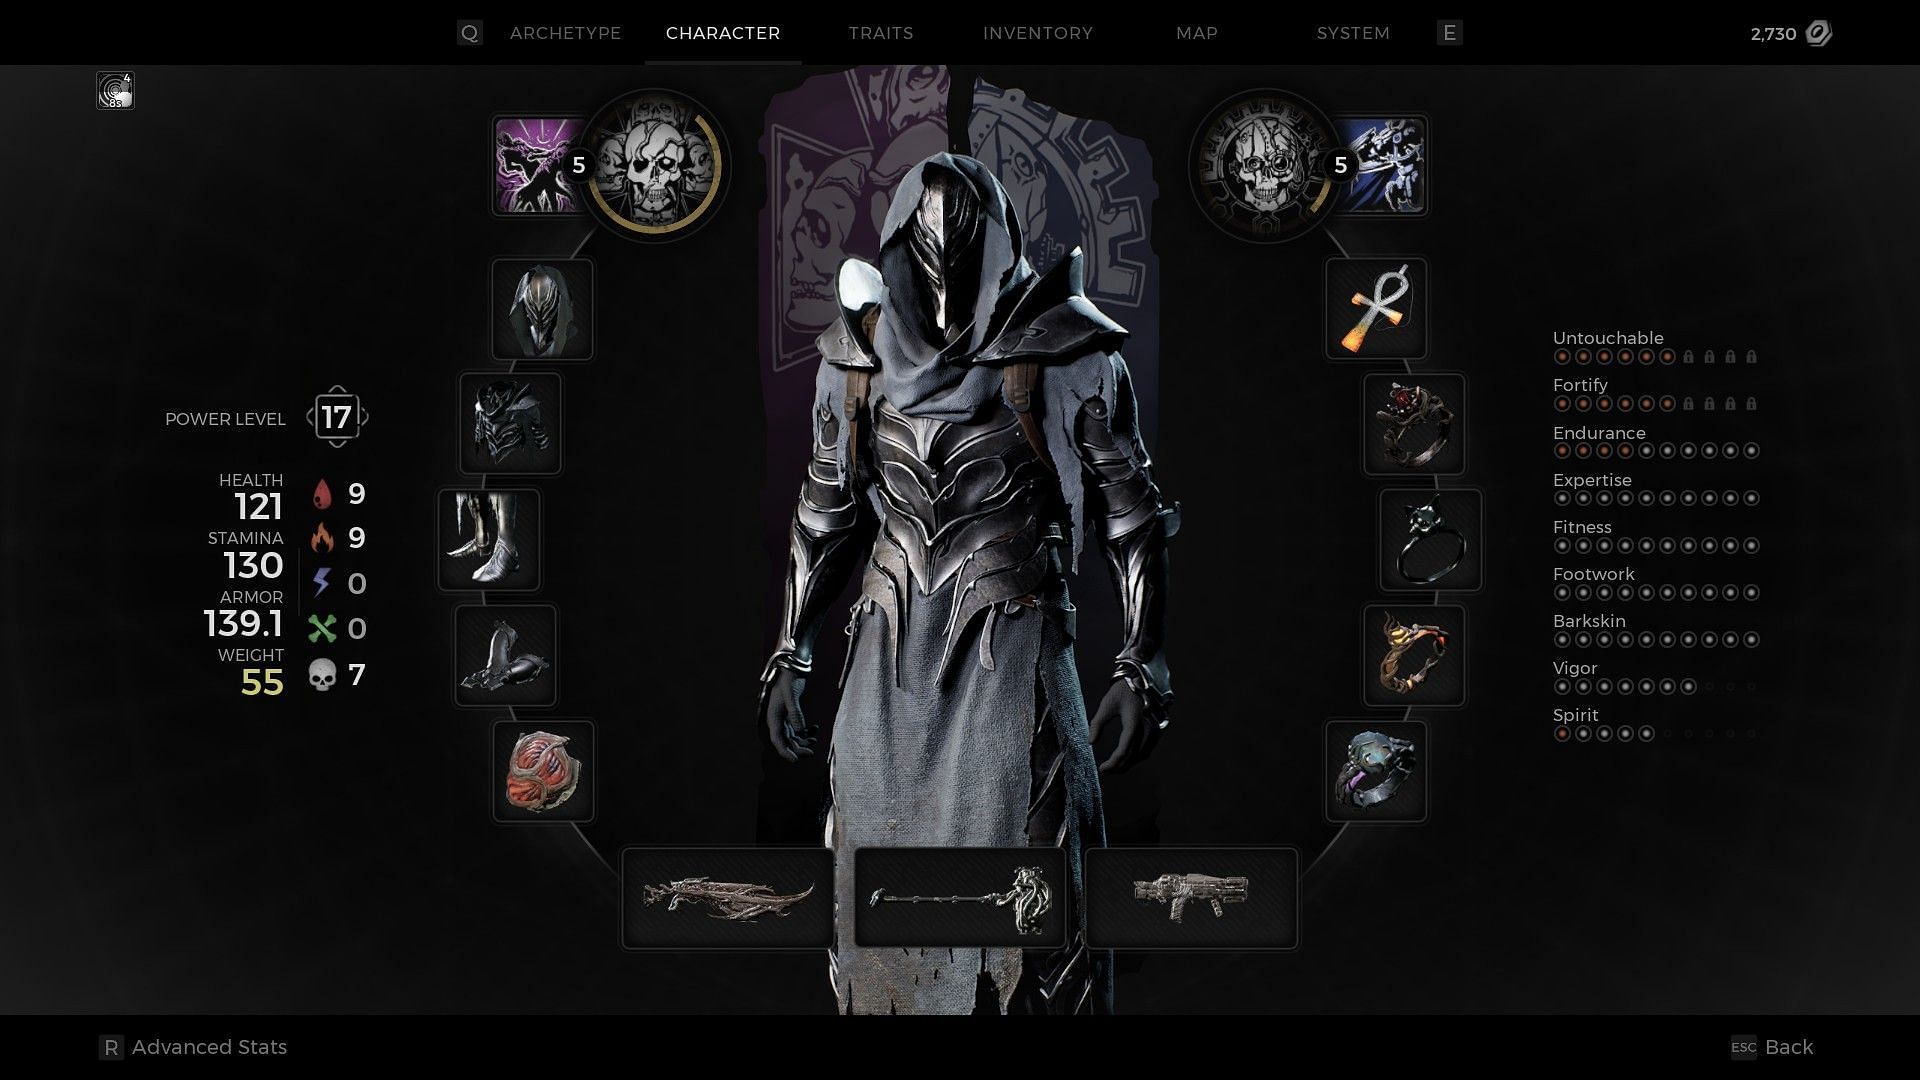 Fae Royal armor set equipped on the character screen of a player 